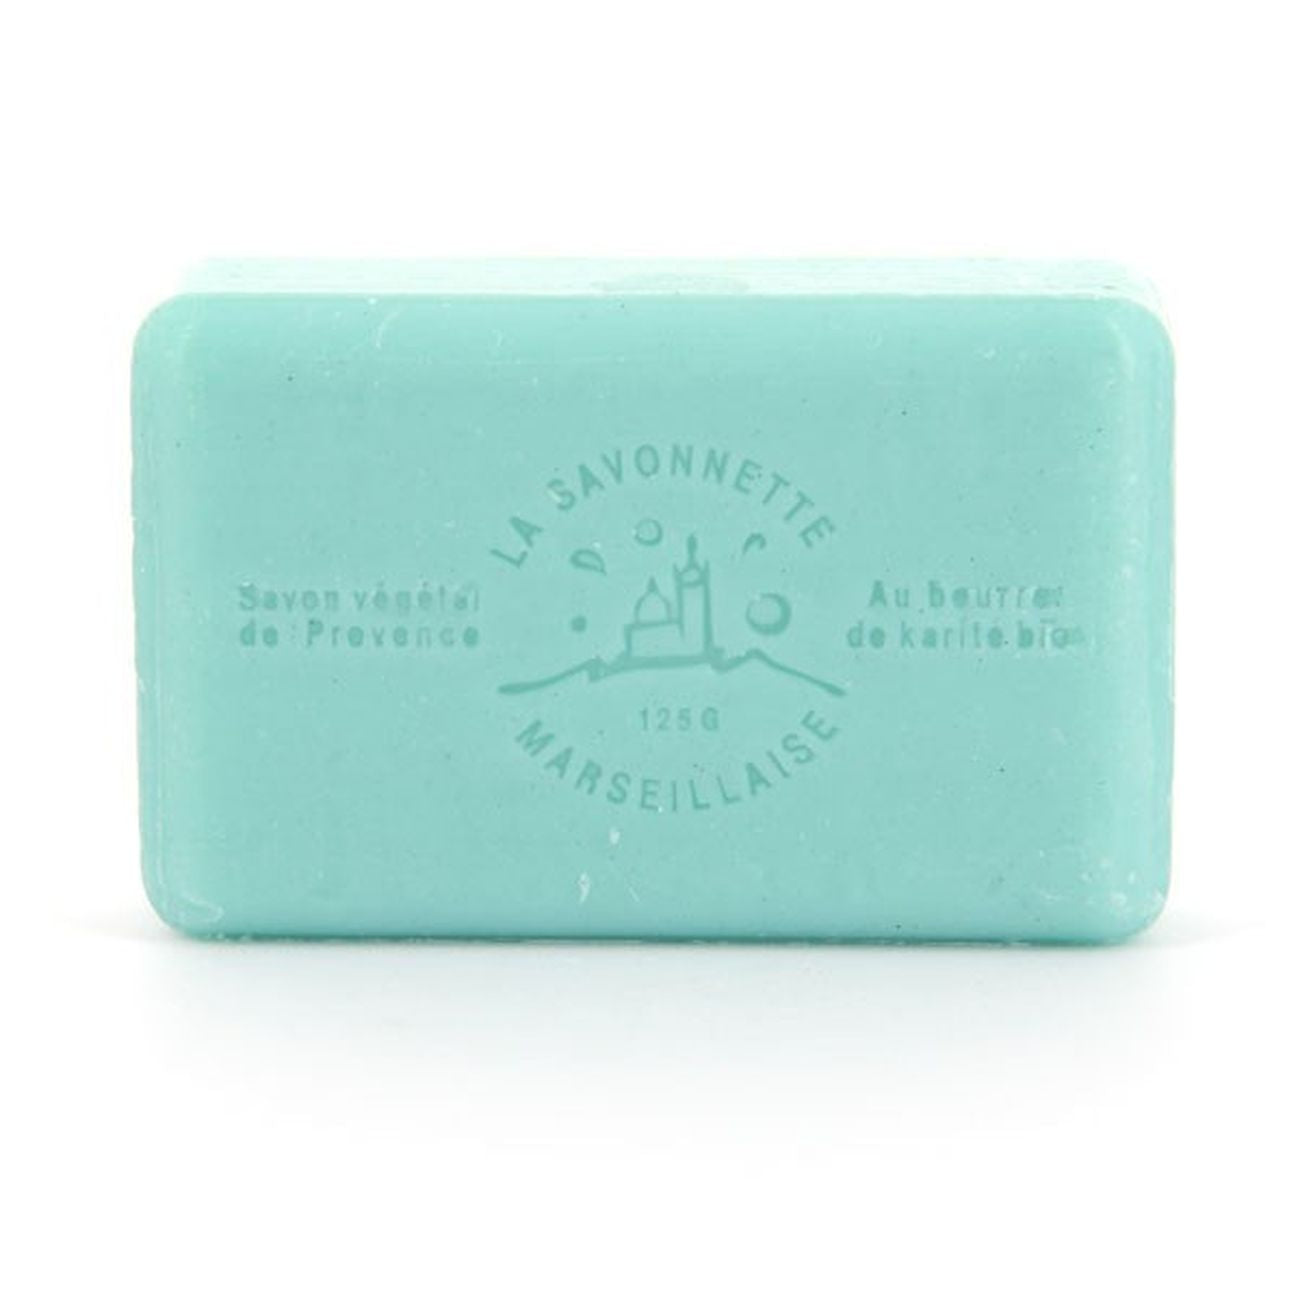 French Marseille Soap Family Parrain (Godfather) 125g